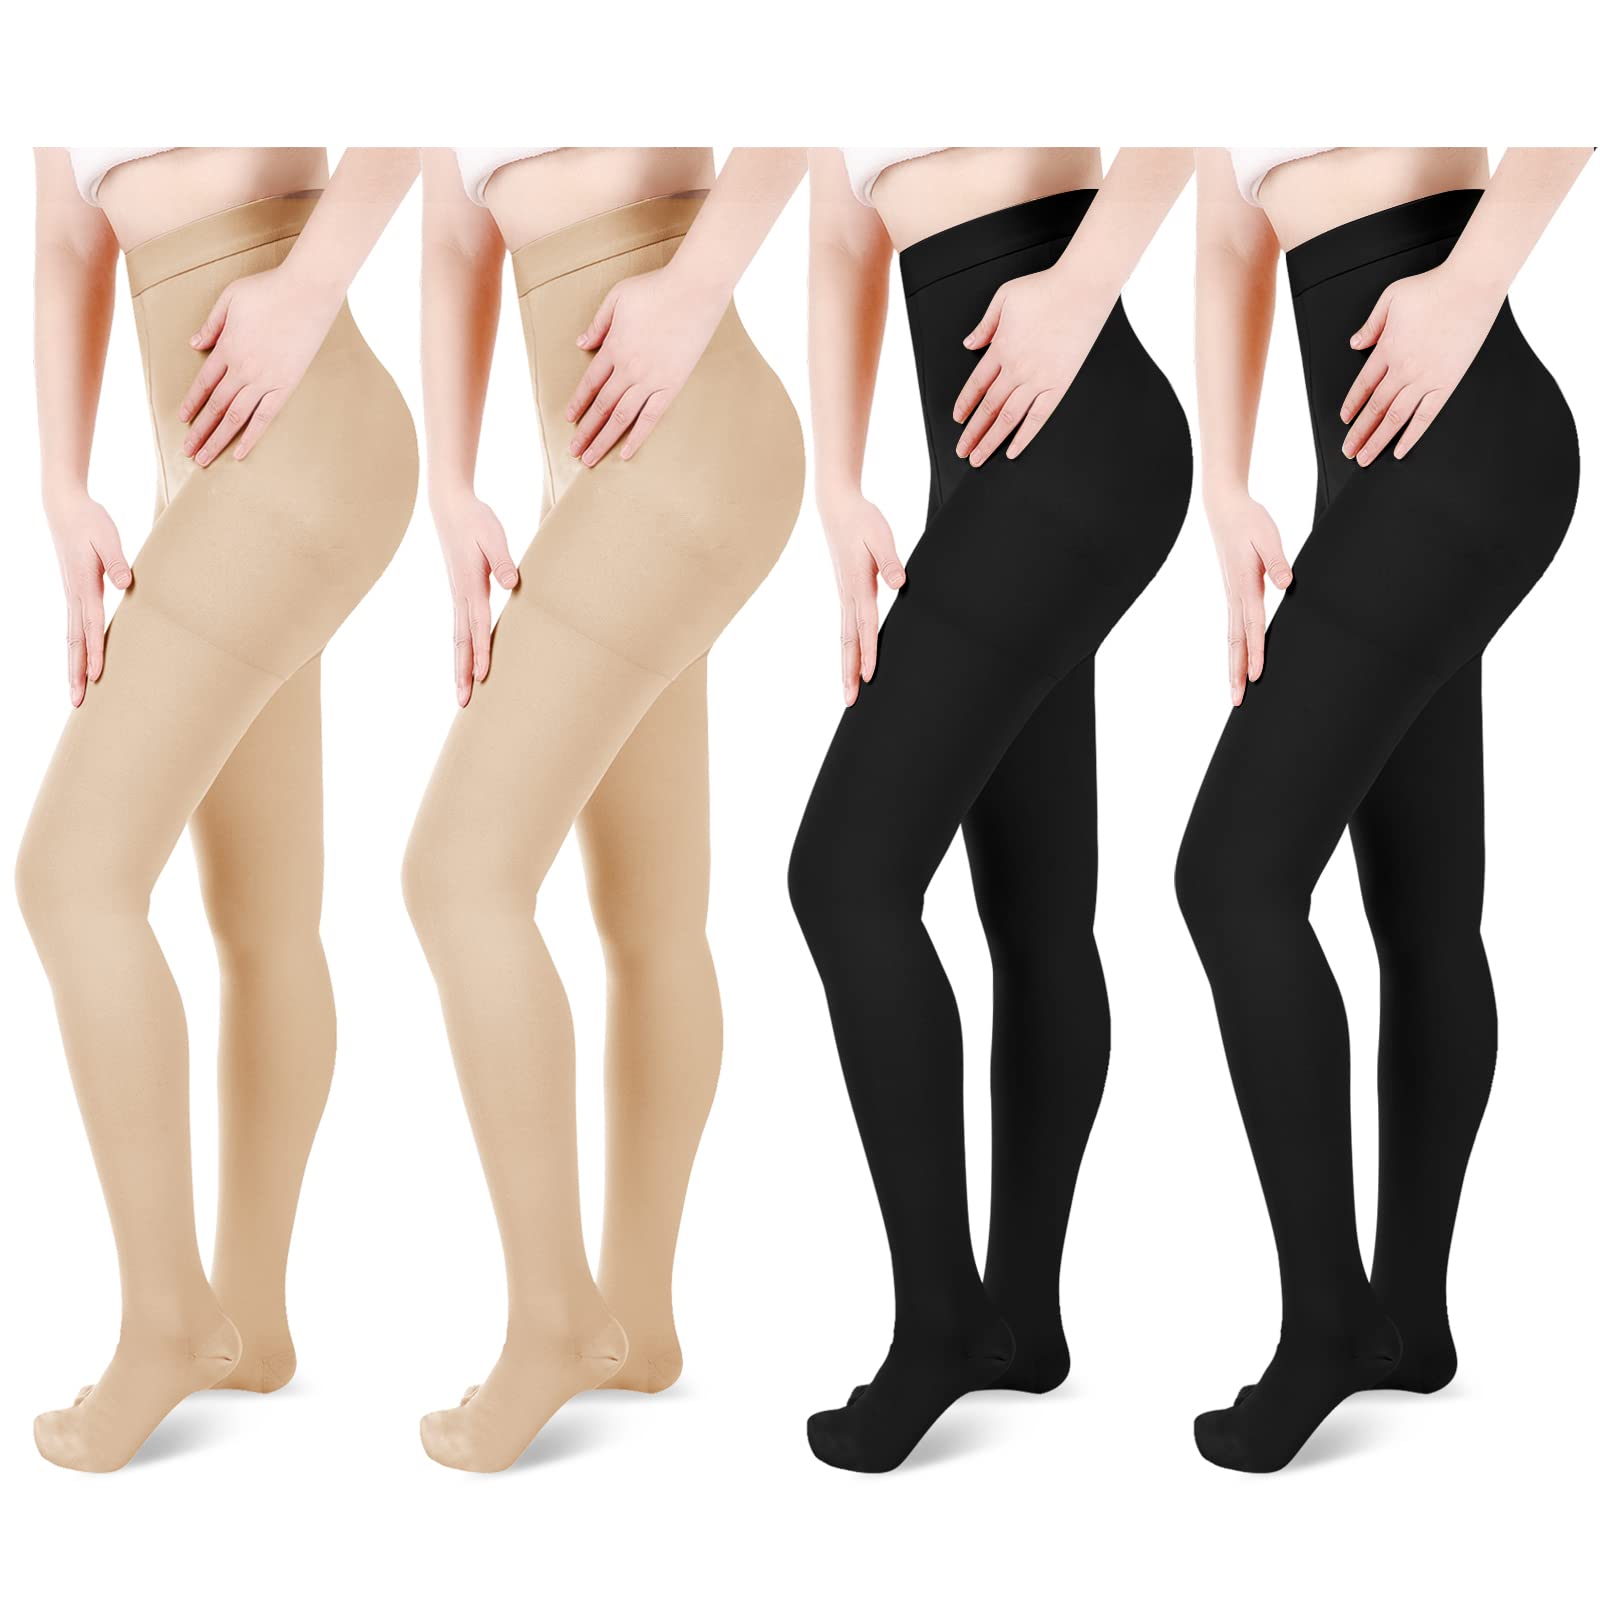 1 2 Pairs Compression Pantyhose 23-32 mmHg Closed Toe Opaque Thick  Graduated Support Hose Stocking for Women Relieve Varicose Veins Edema  Swelling